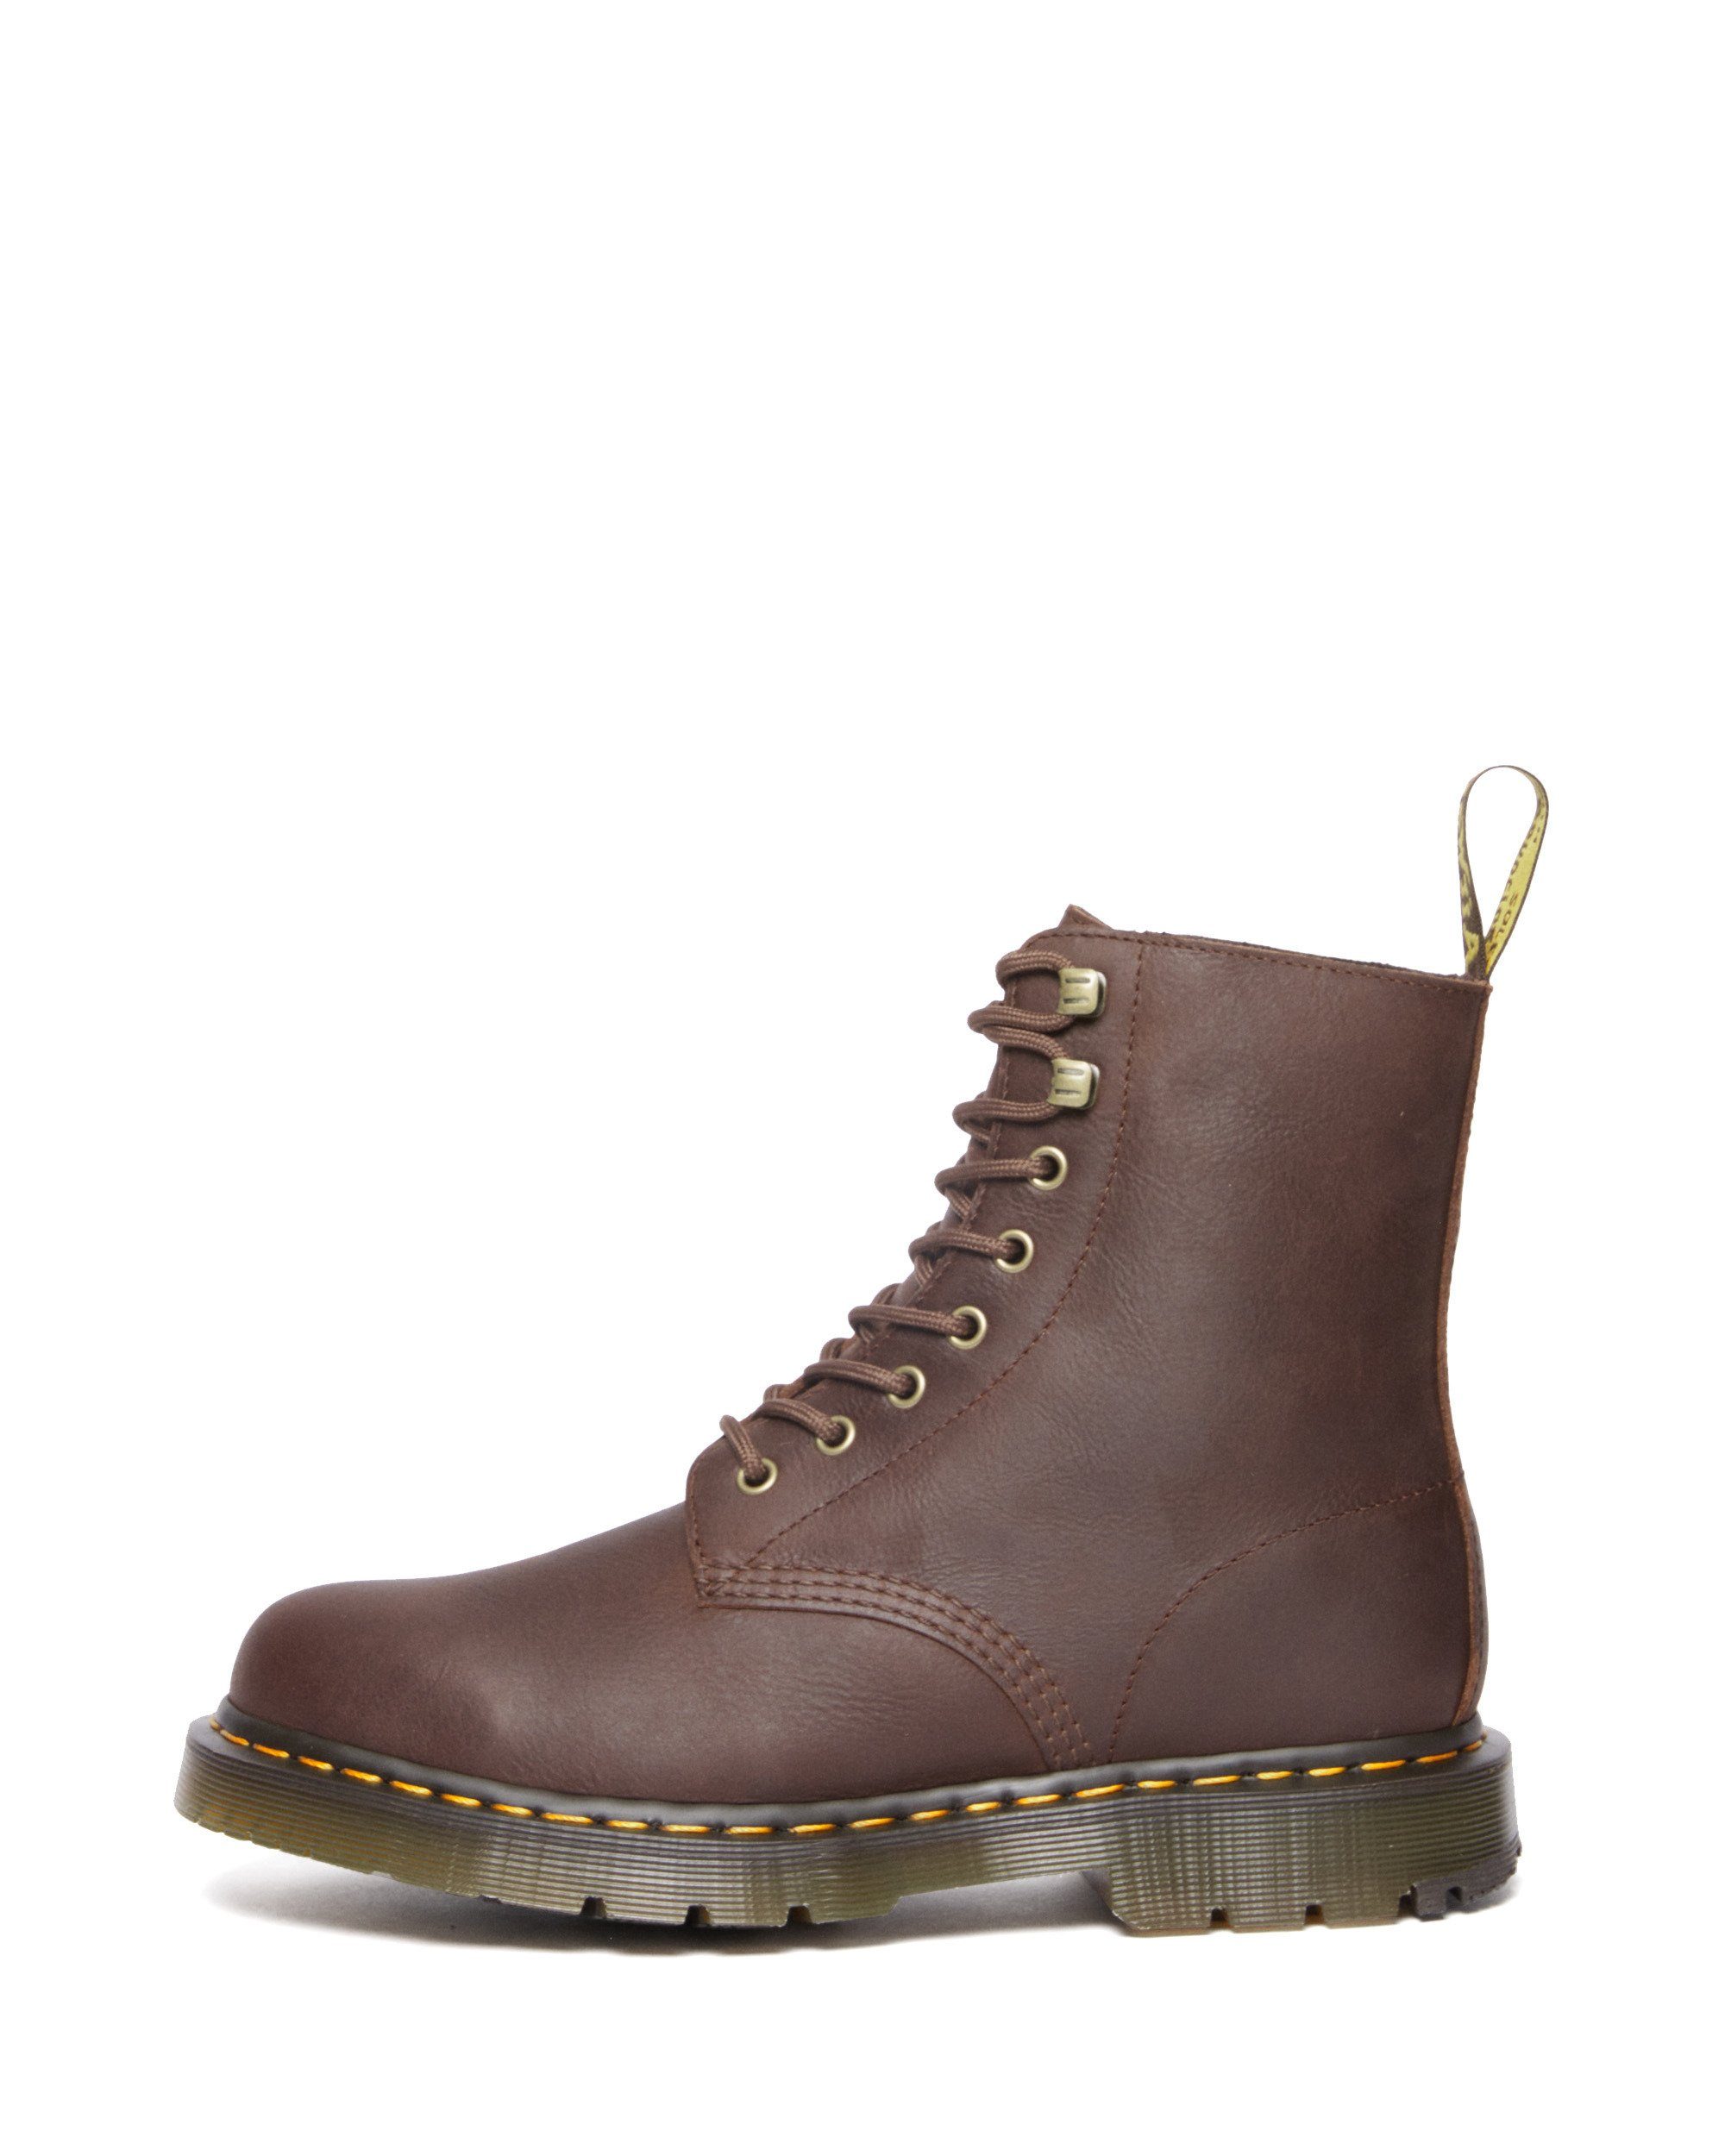 DR. MARTENS 1460 Pascal Wintergrip Outlaw WP Ankleboots (2-tlg) braun | Schnürboots